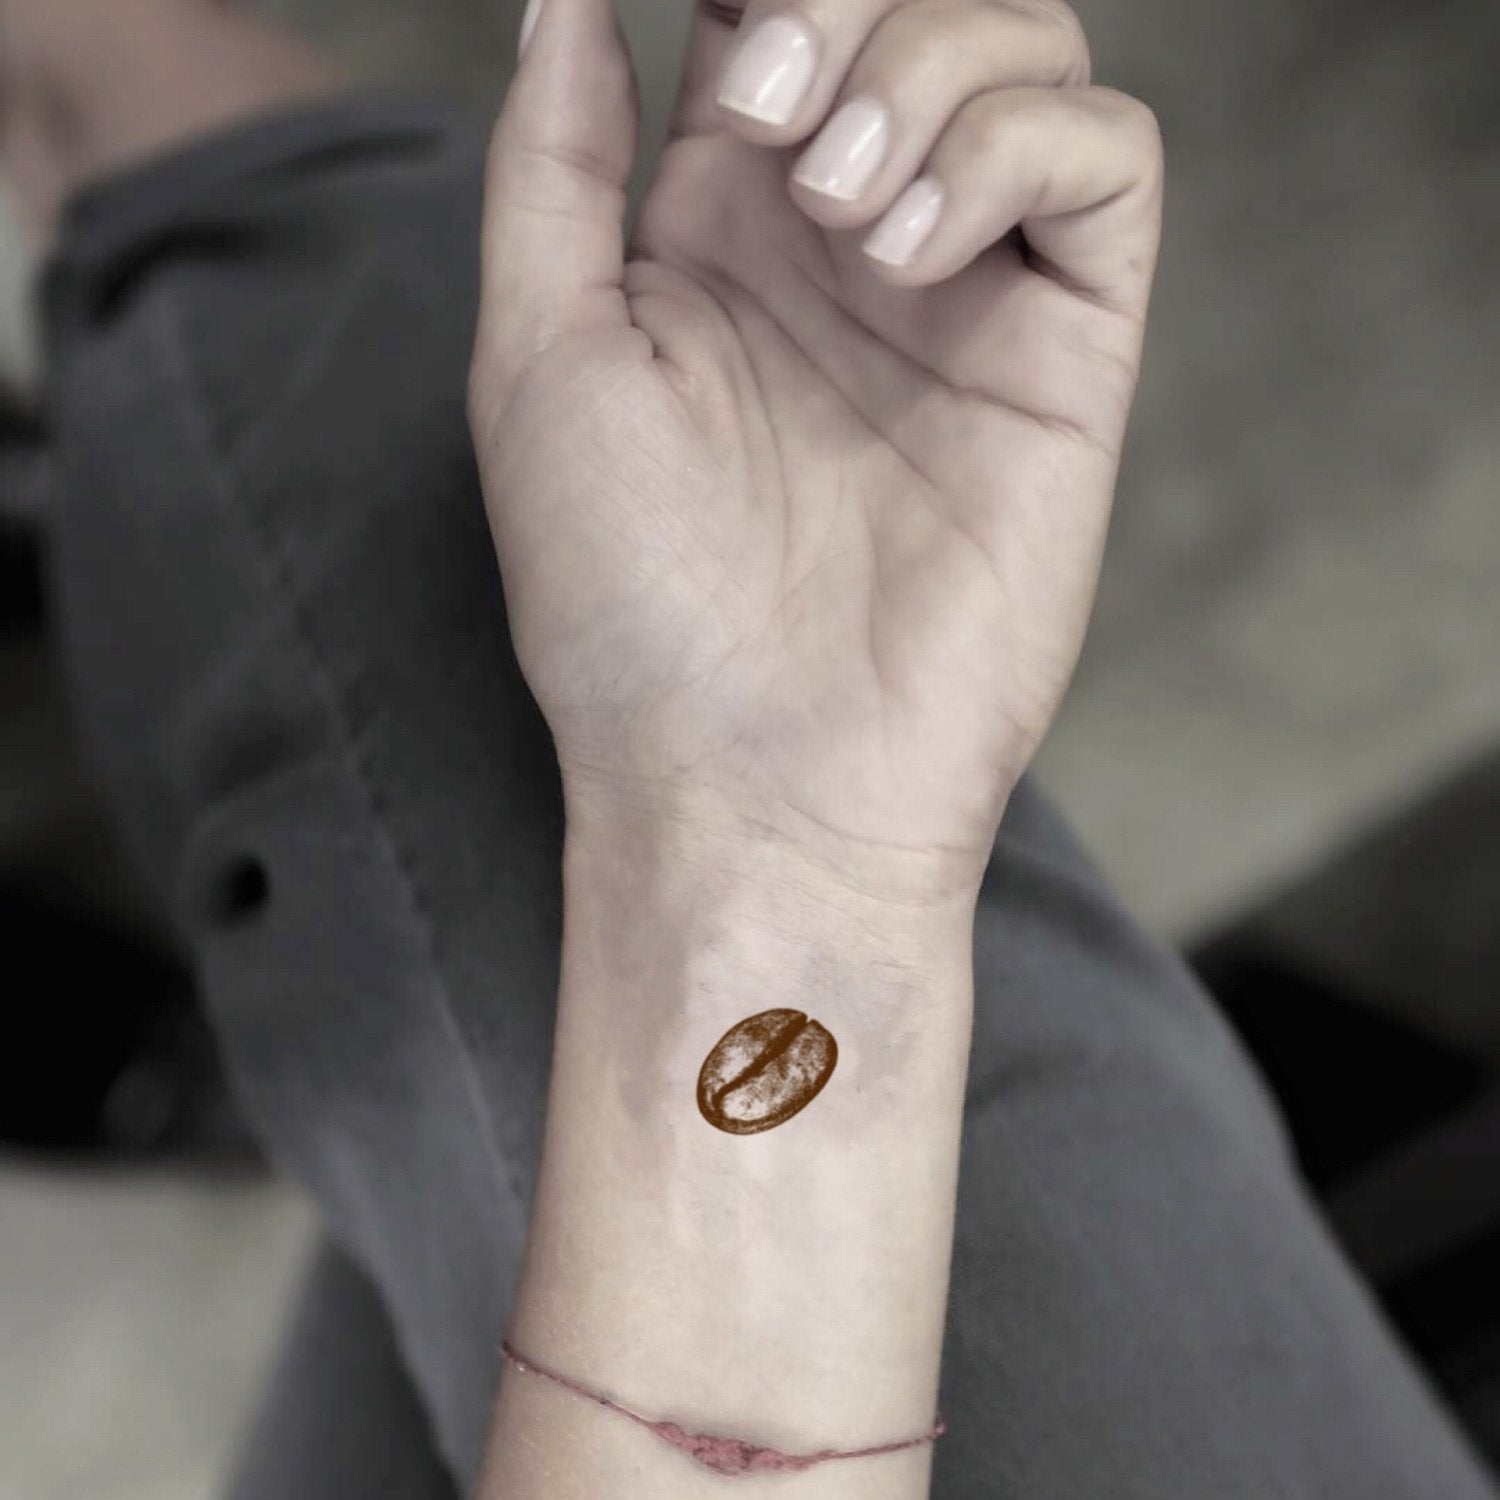 56 Delightful Coffee Tattoos To Fuel Your Soul - Our Mindful Life